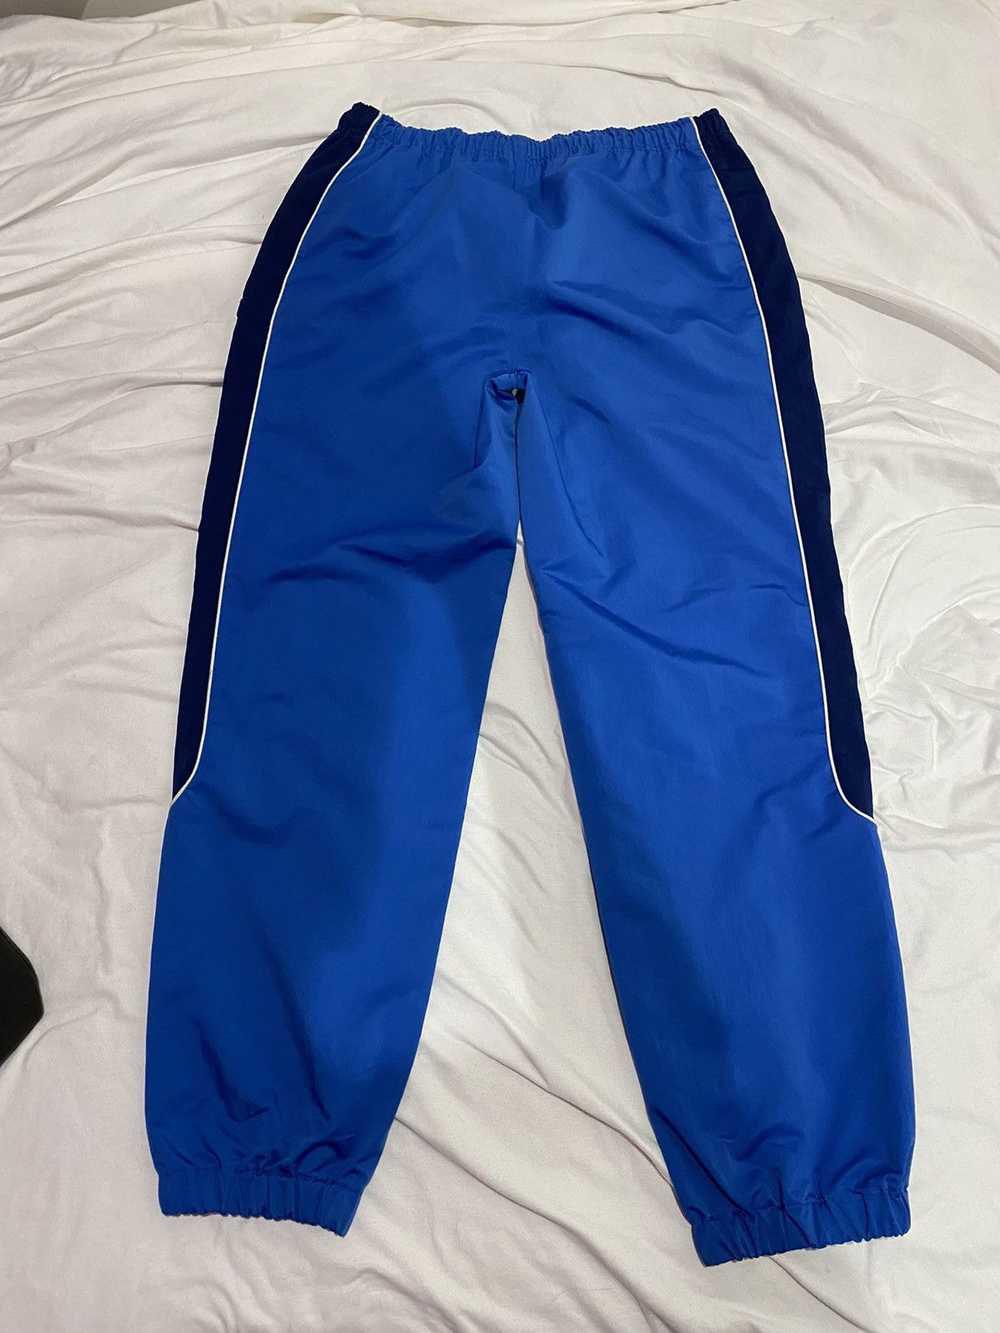 Madhappy Madhappy L.O.R.A. WARM UP PANT - image 2